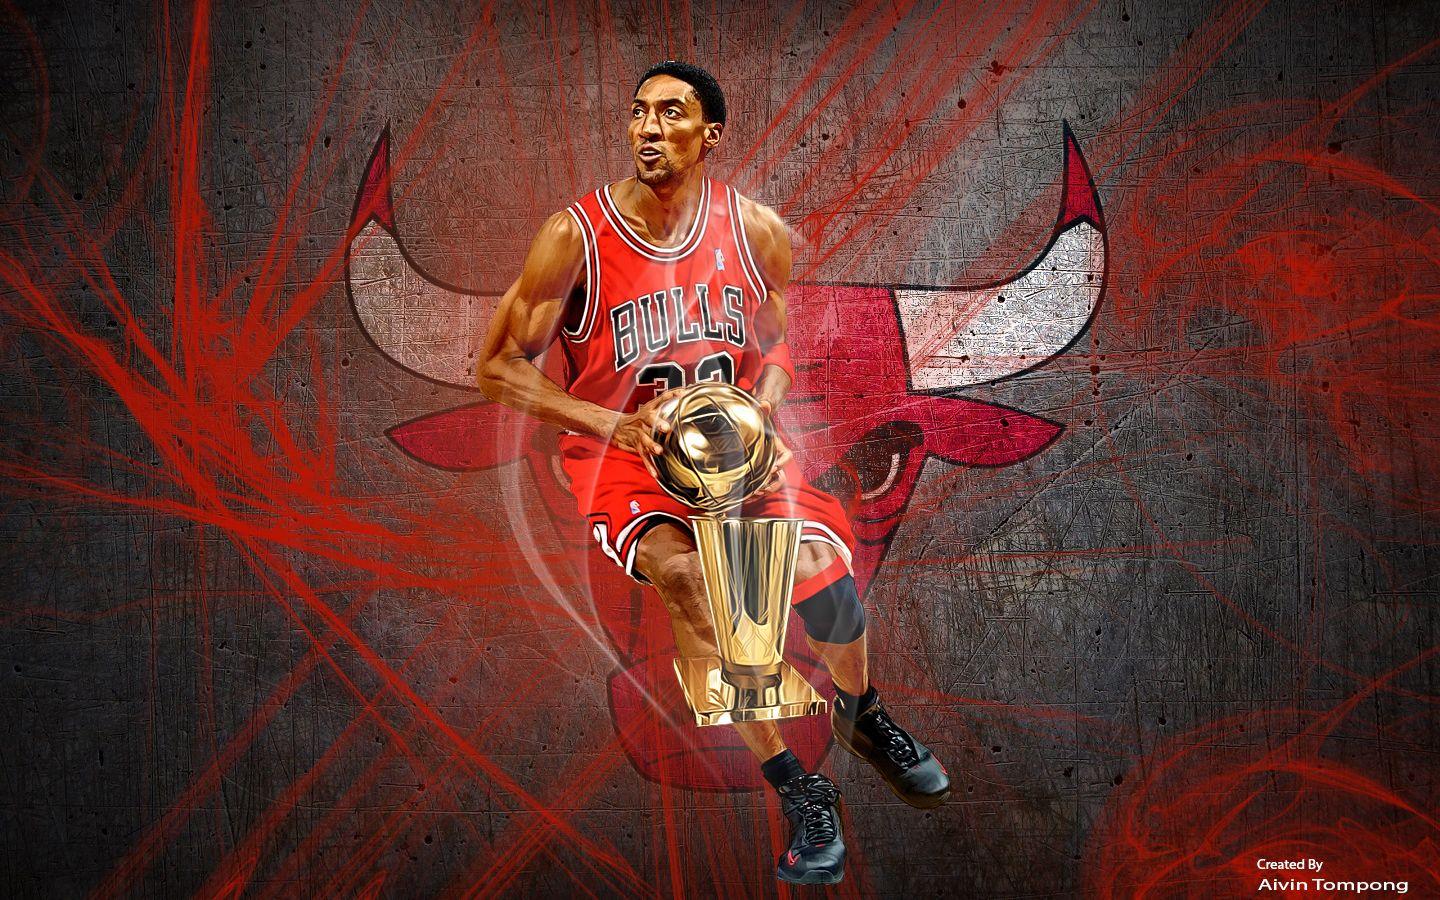 HoopsWallpaperscom  Get the latest HD and mobile NBA wallpapers today   Blog Archive NEW Scottie Pippen Dennis Rodman and Michael Jordan Chicago  Bulls wallpaper  HoopsWallpaperscom  Get the latest HD